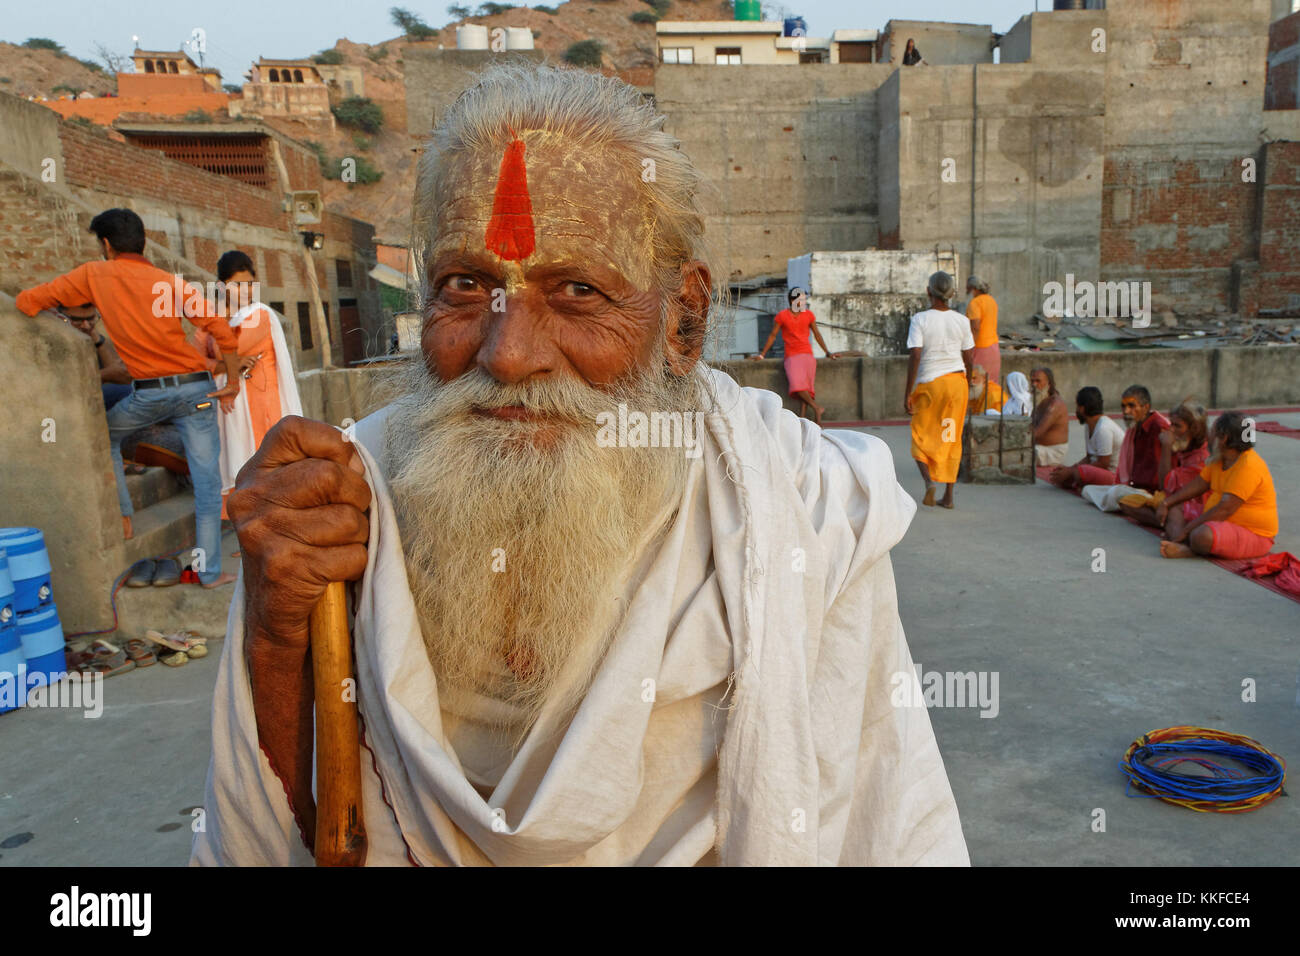 JAIPUR, INDIA, October 27, 2017 : Portrait of Sadhus. A sadhu is a religious ascetic, mendicant or any holy person in Hinduism and Jainism who has ren Stock Photo